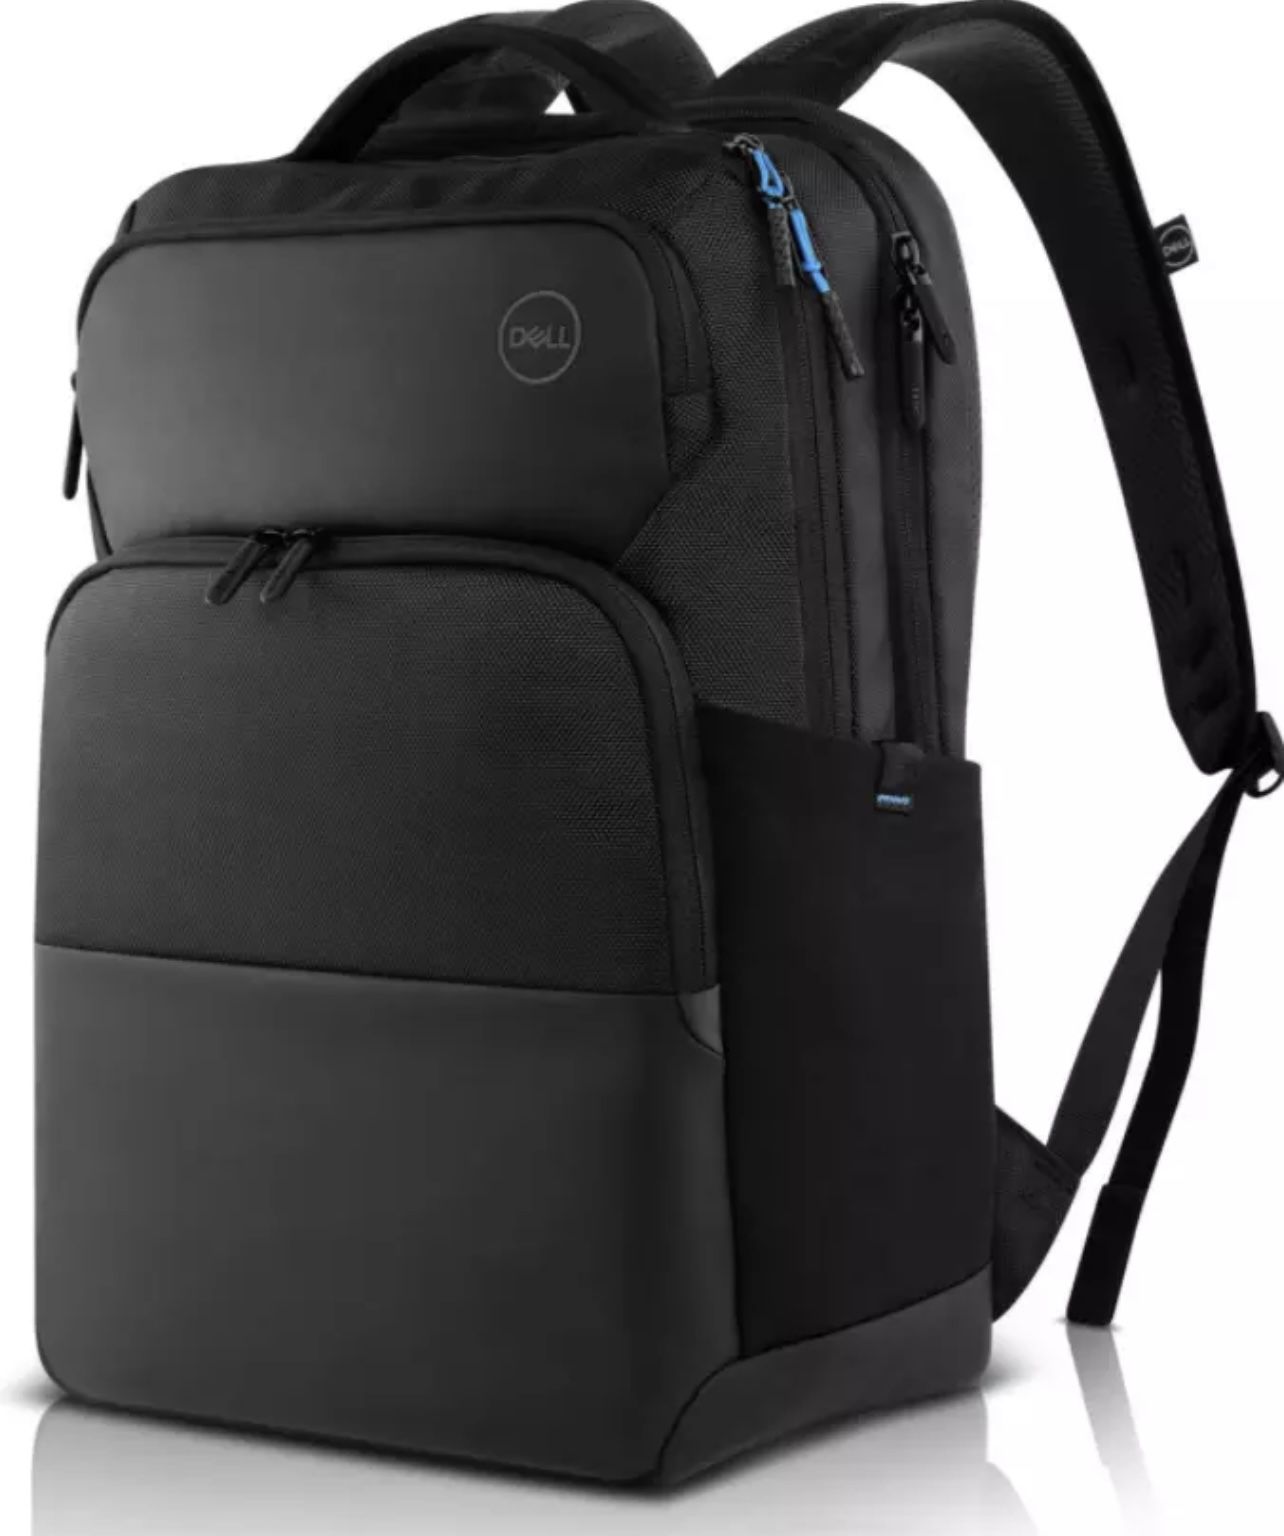 Dell Pro Carrying Case (Backpack) for 15" Notebook - Black